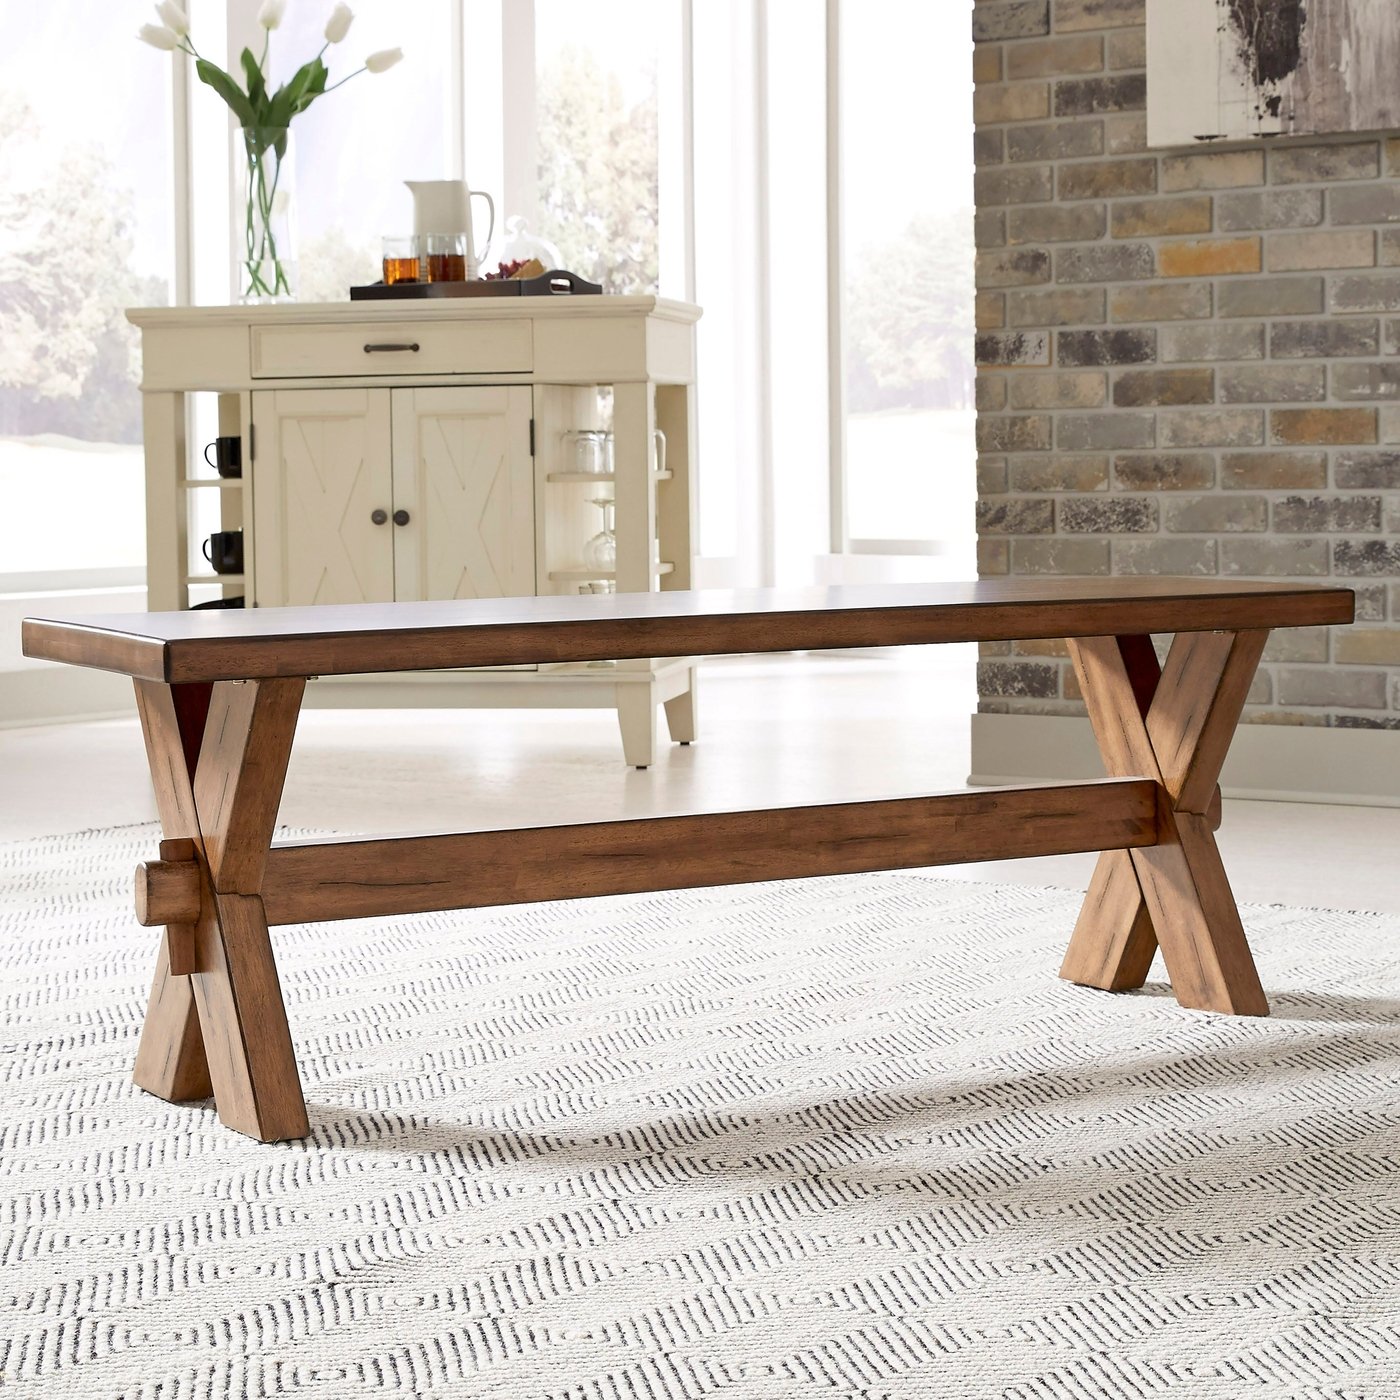 How to Find the Right Dining Bench For Your Interiors - Foter